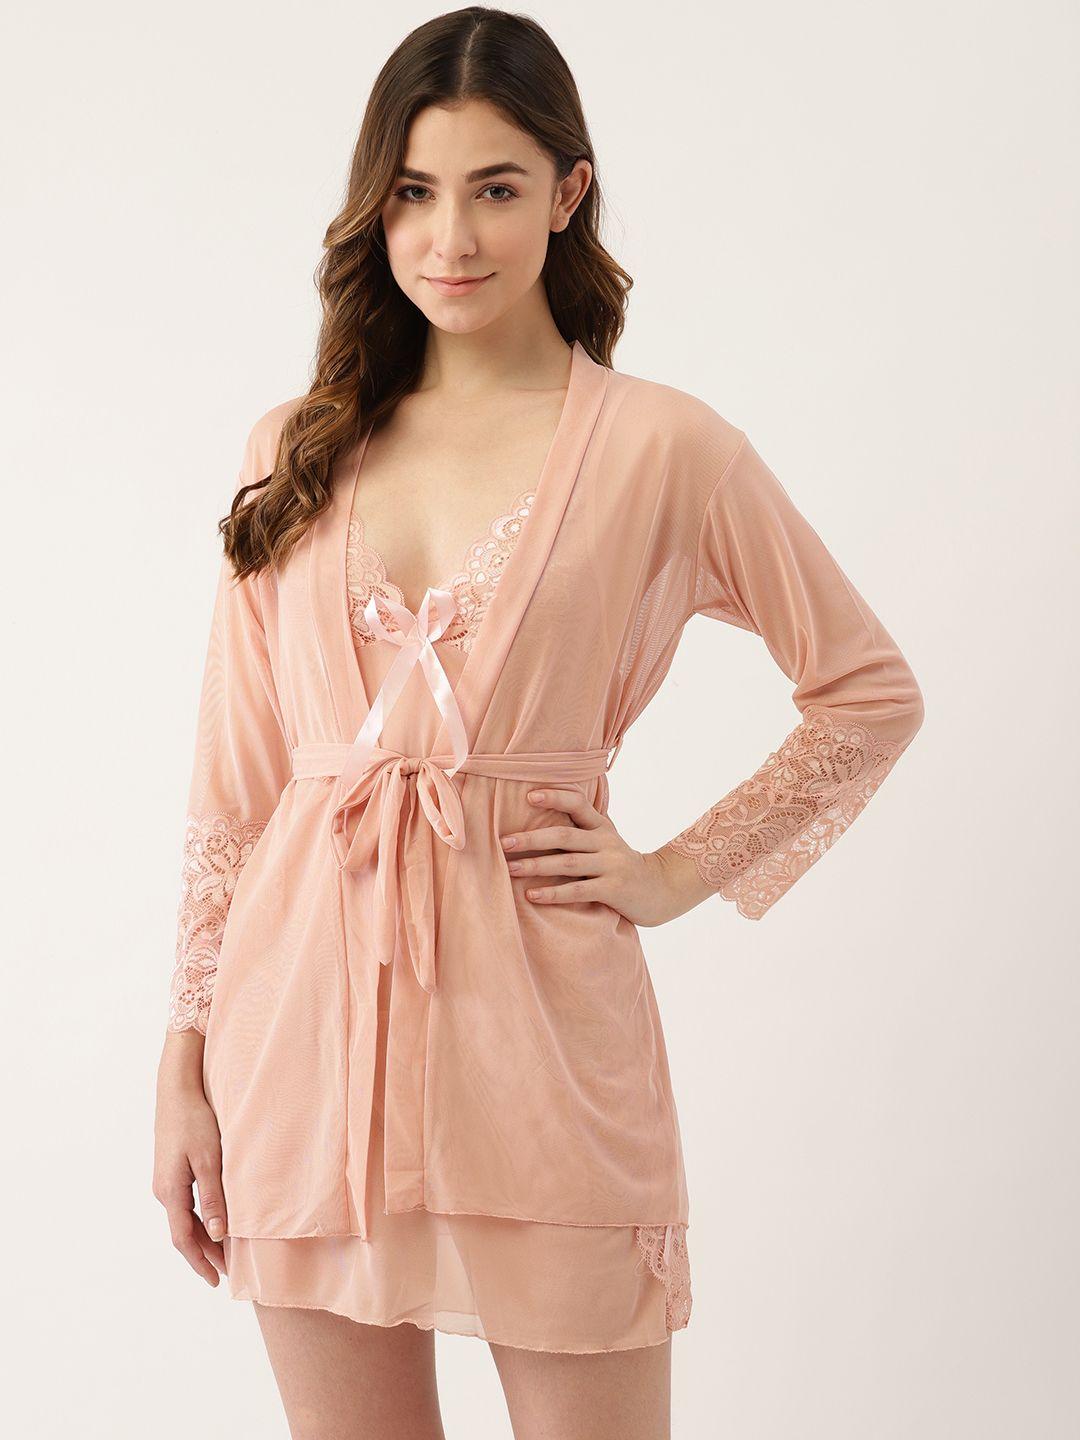 ms lingies women peach-coloured self design baby doll comes with a robe